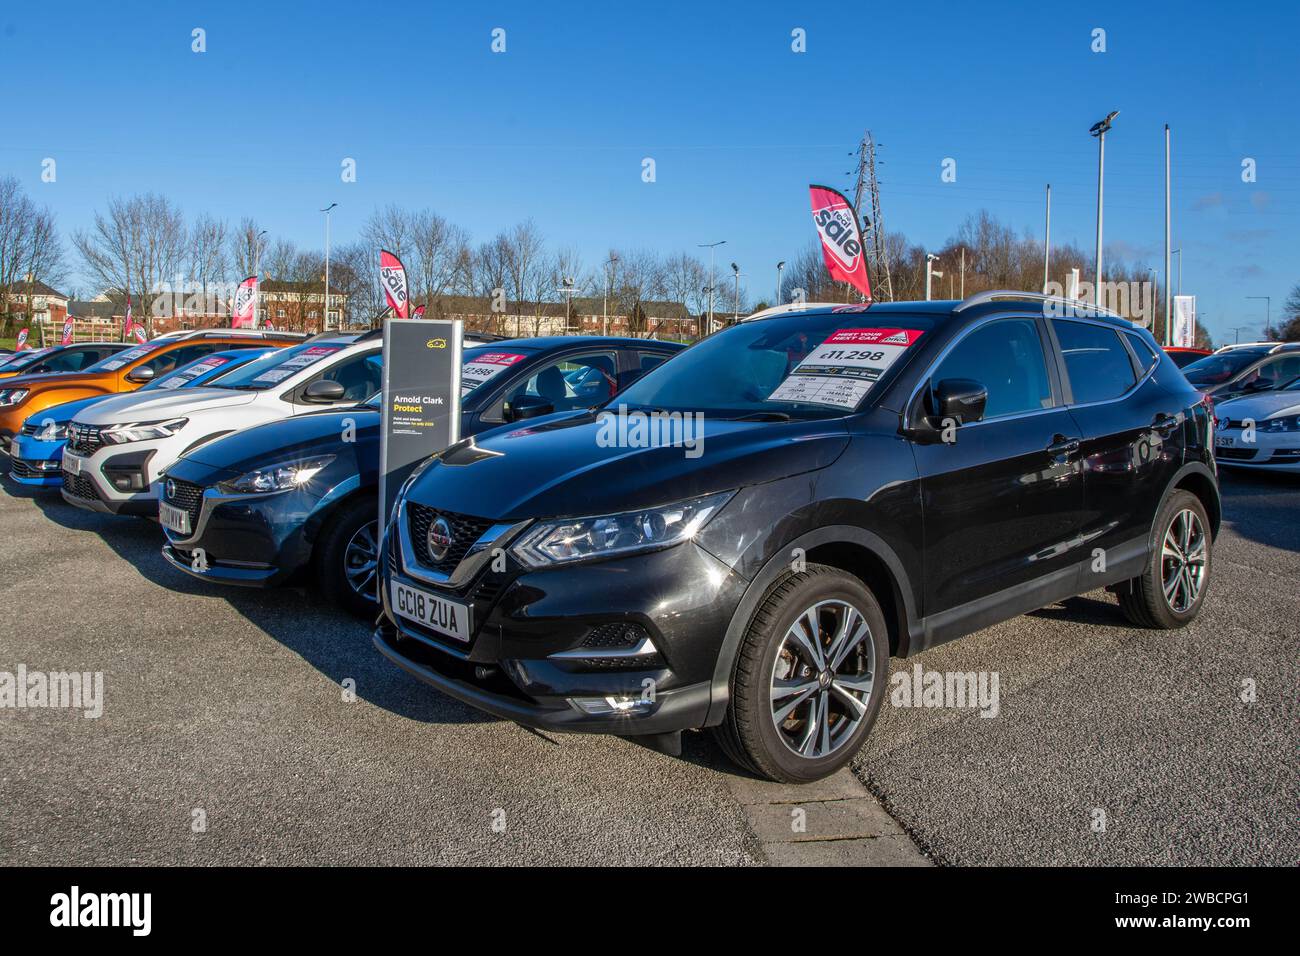 2018 Nissan Qashqai N-Connecta DIG-T 115 Start/Stop Black Car SUV Petrol 1197 cc, 1.3-litre petrol engine; Used cars for sale in Preston, UK Stock Photo